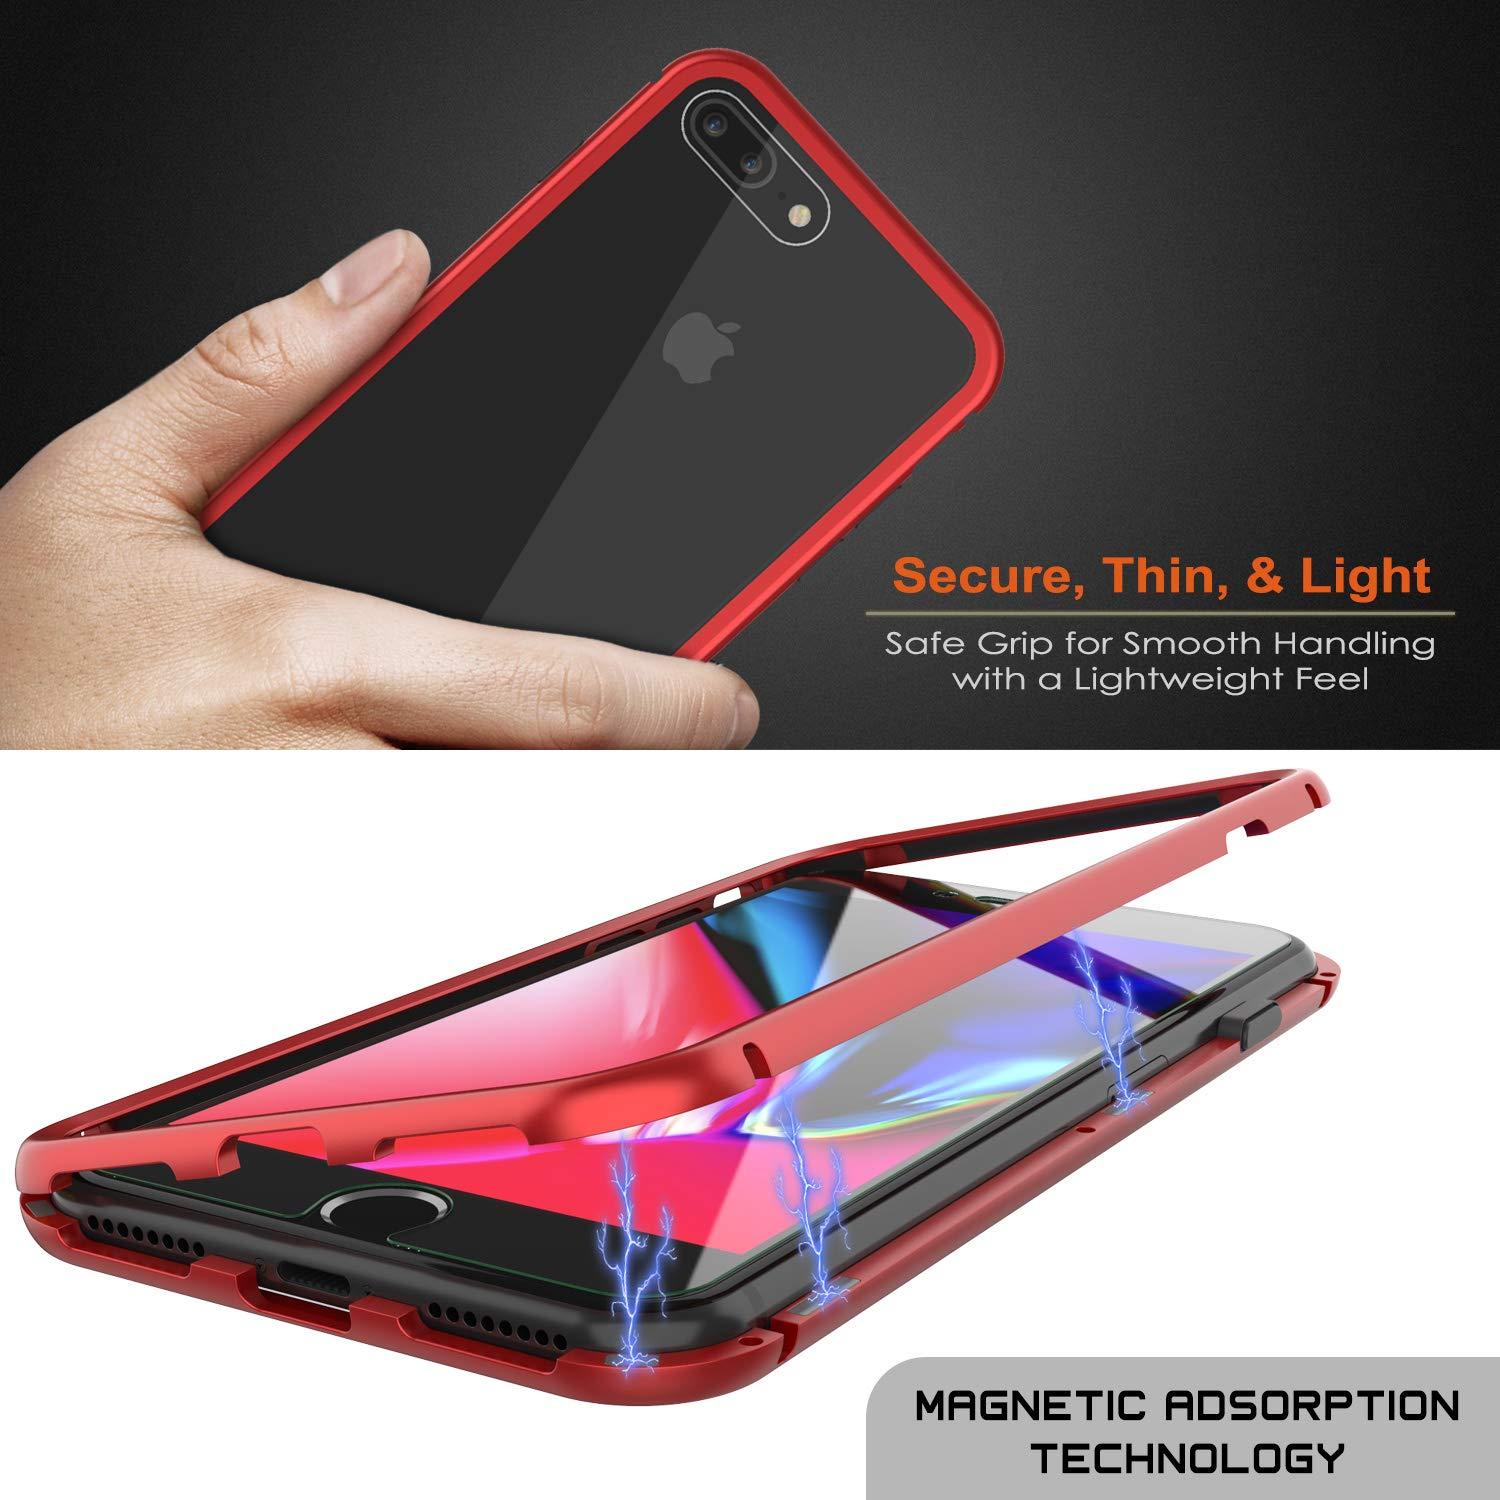 iPhone 7+ Plus Case, Punkcase Magnetix 2.0 Protective TPU Cover W/ Tempered Glass Screen Protector [Red]